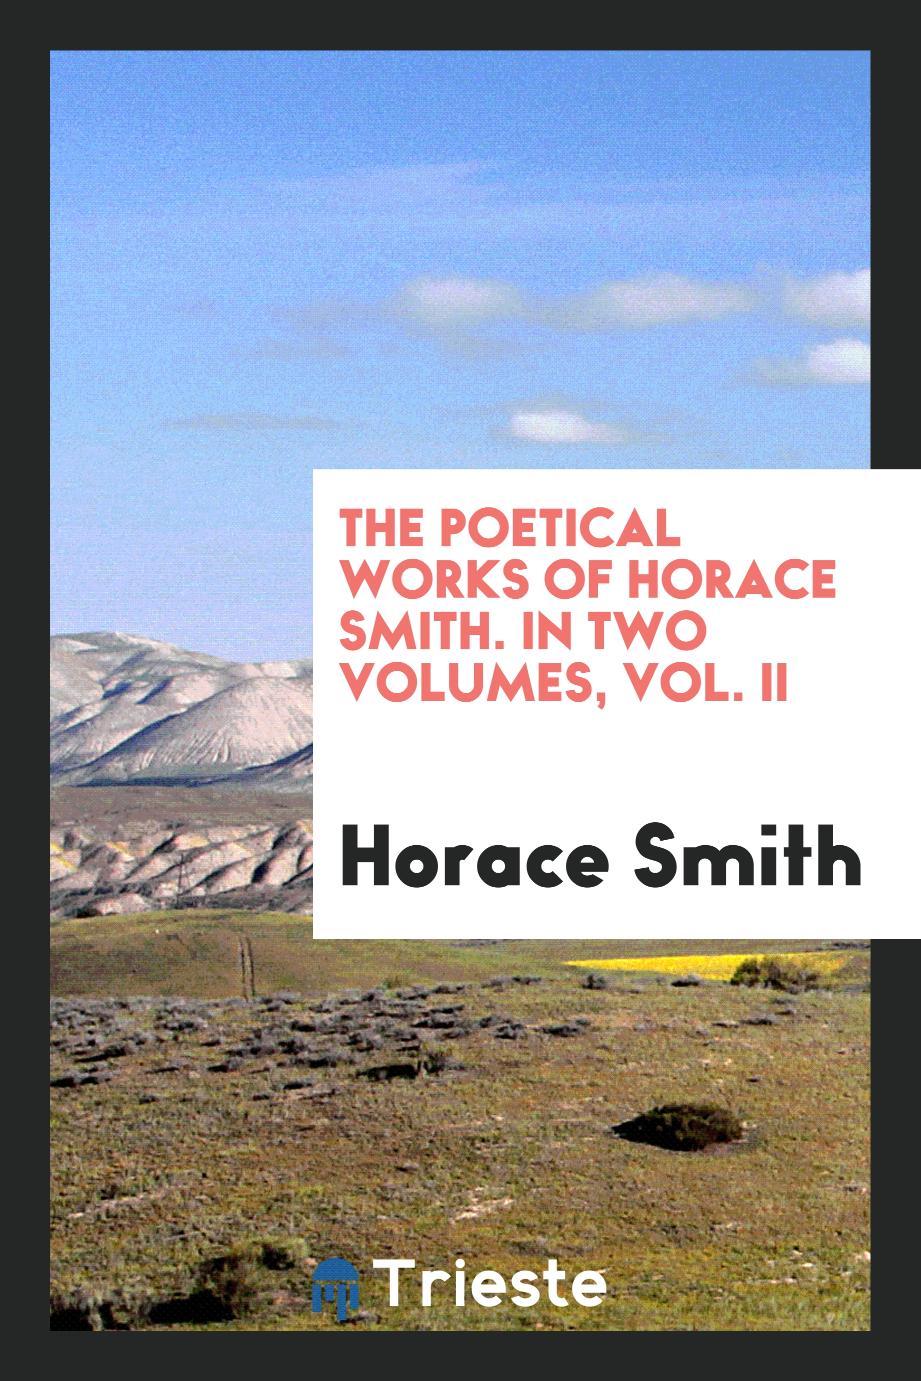 The Poetical Works of Horace Smith. In Two Volumes, Vol. II